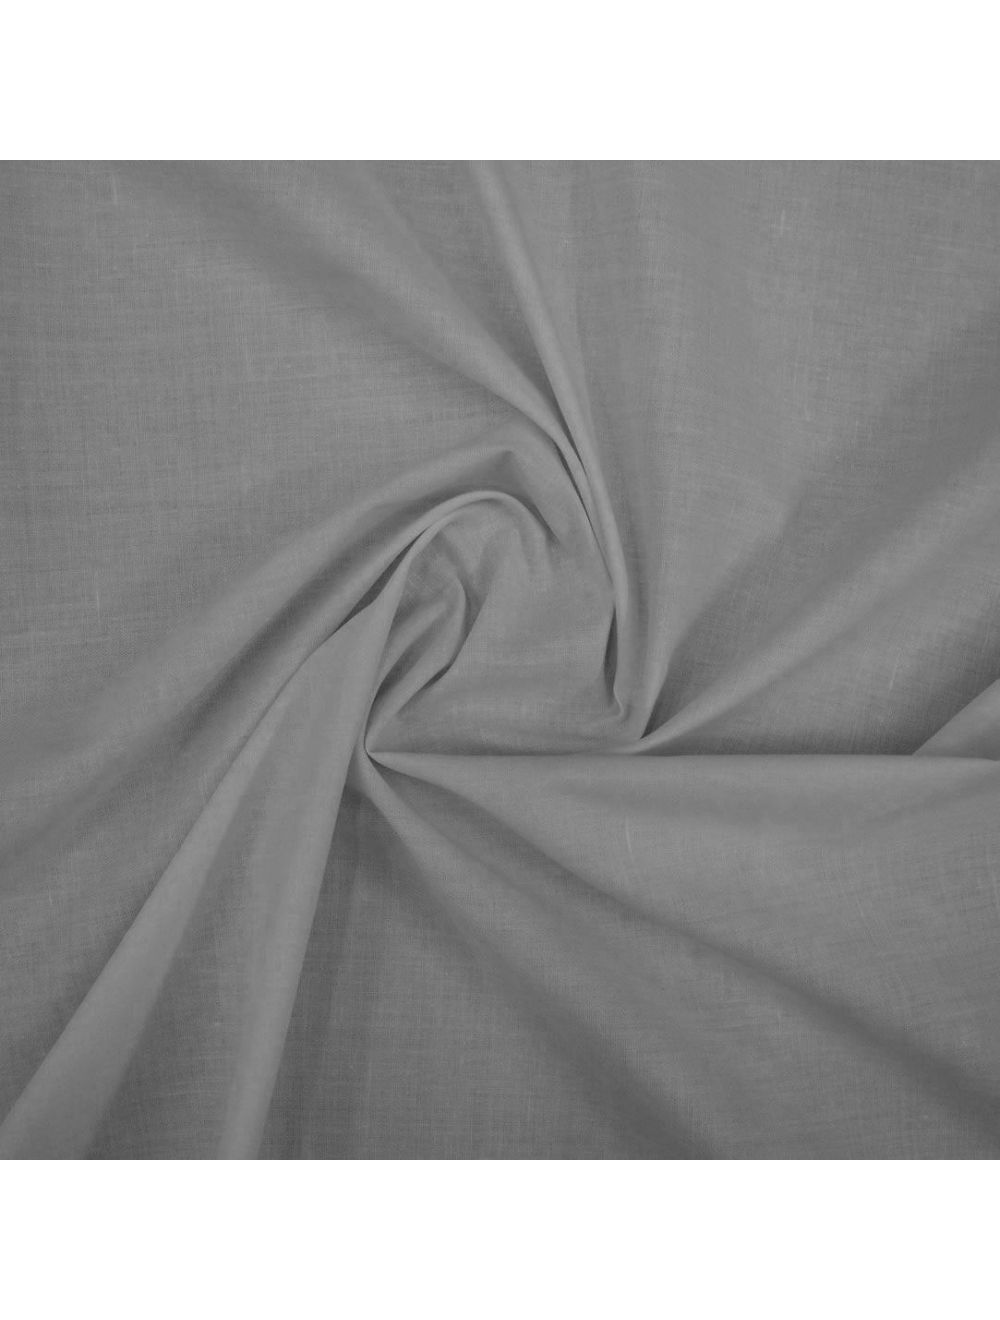 Heavy Duty Thermal Blackout Curtain Lining Fabric | Calico Laine